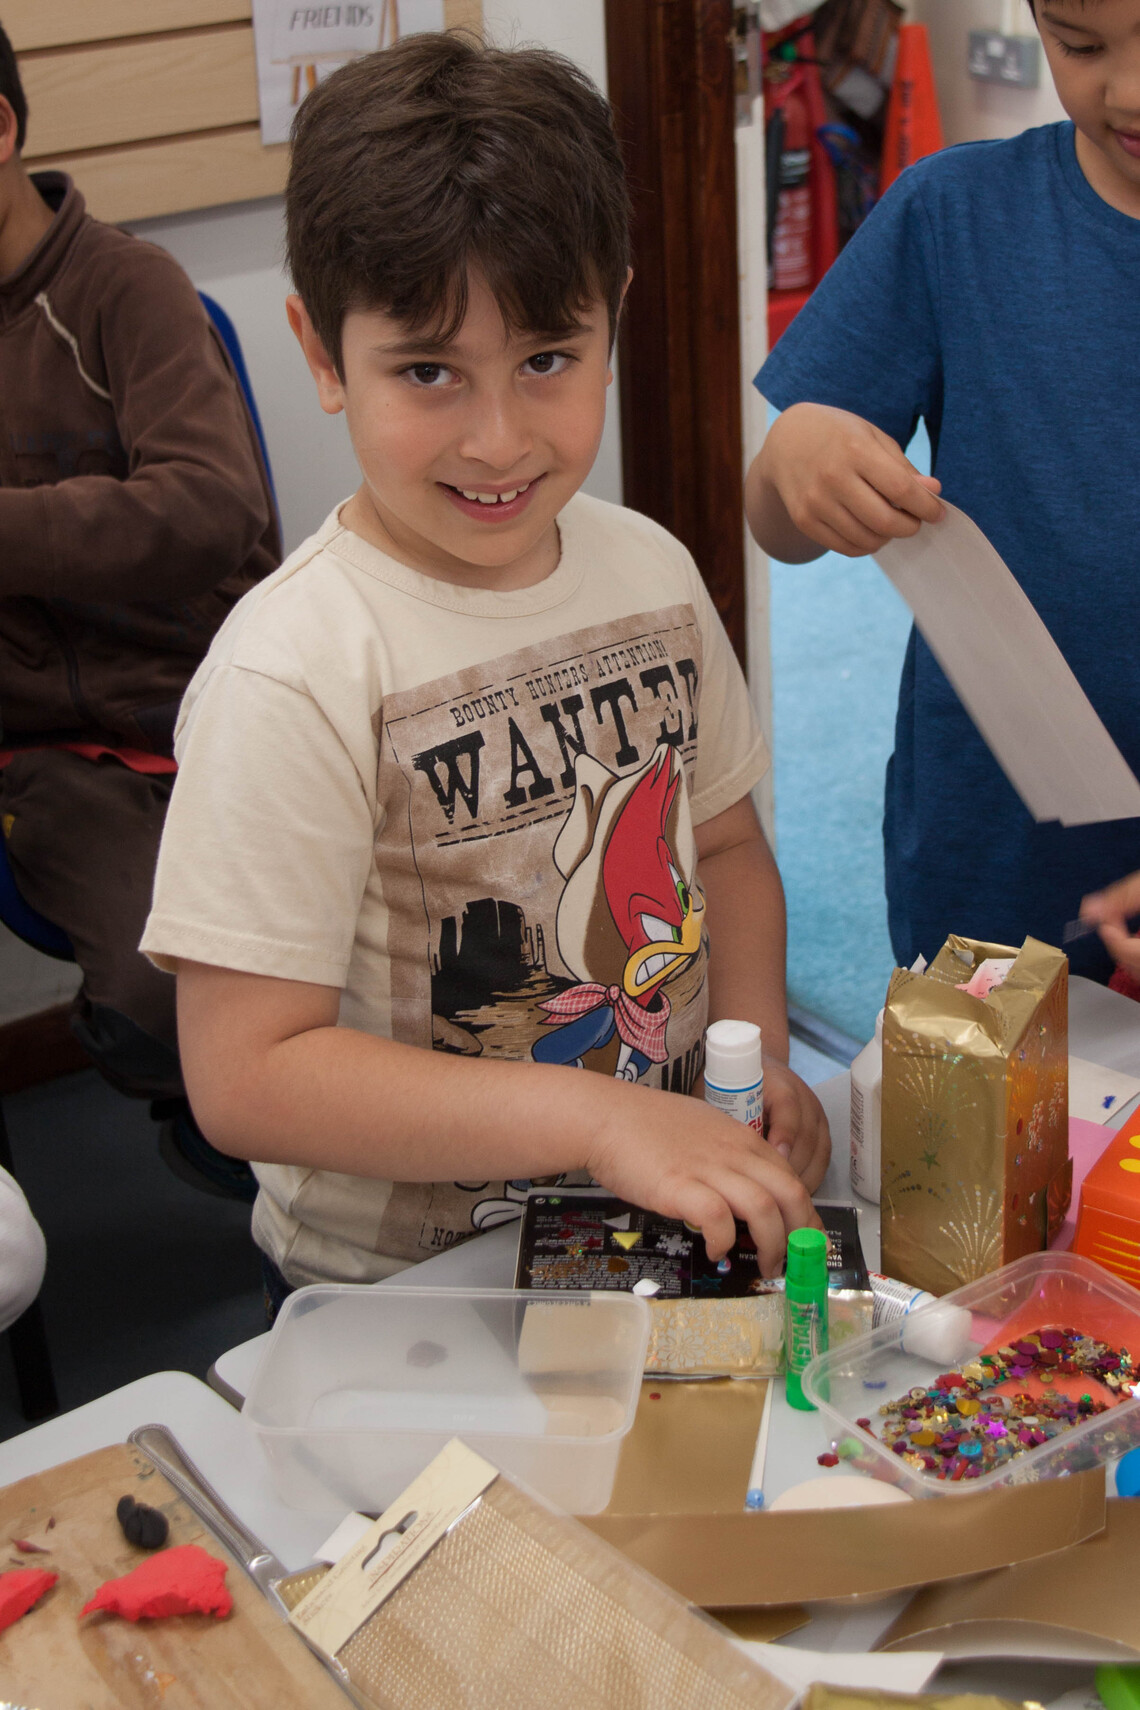 Boy Participating in Craft Event